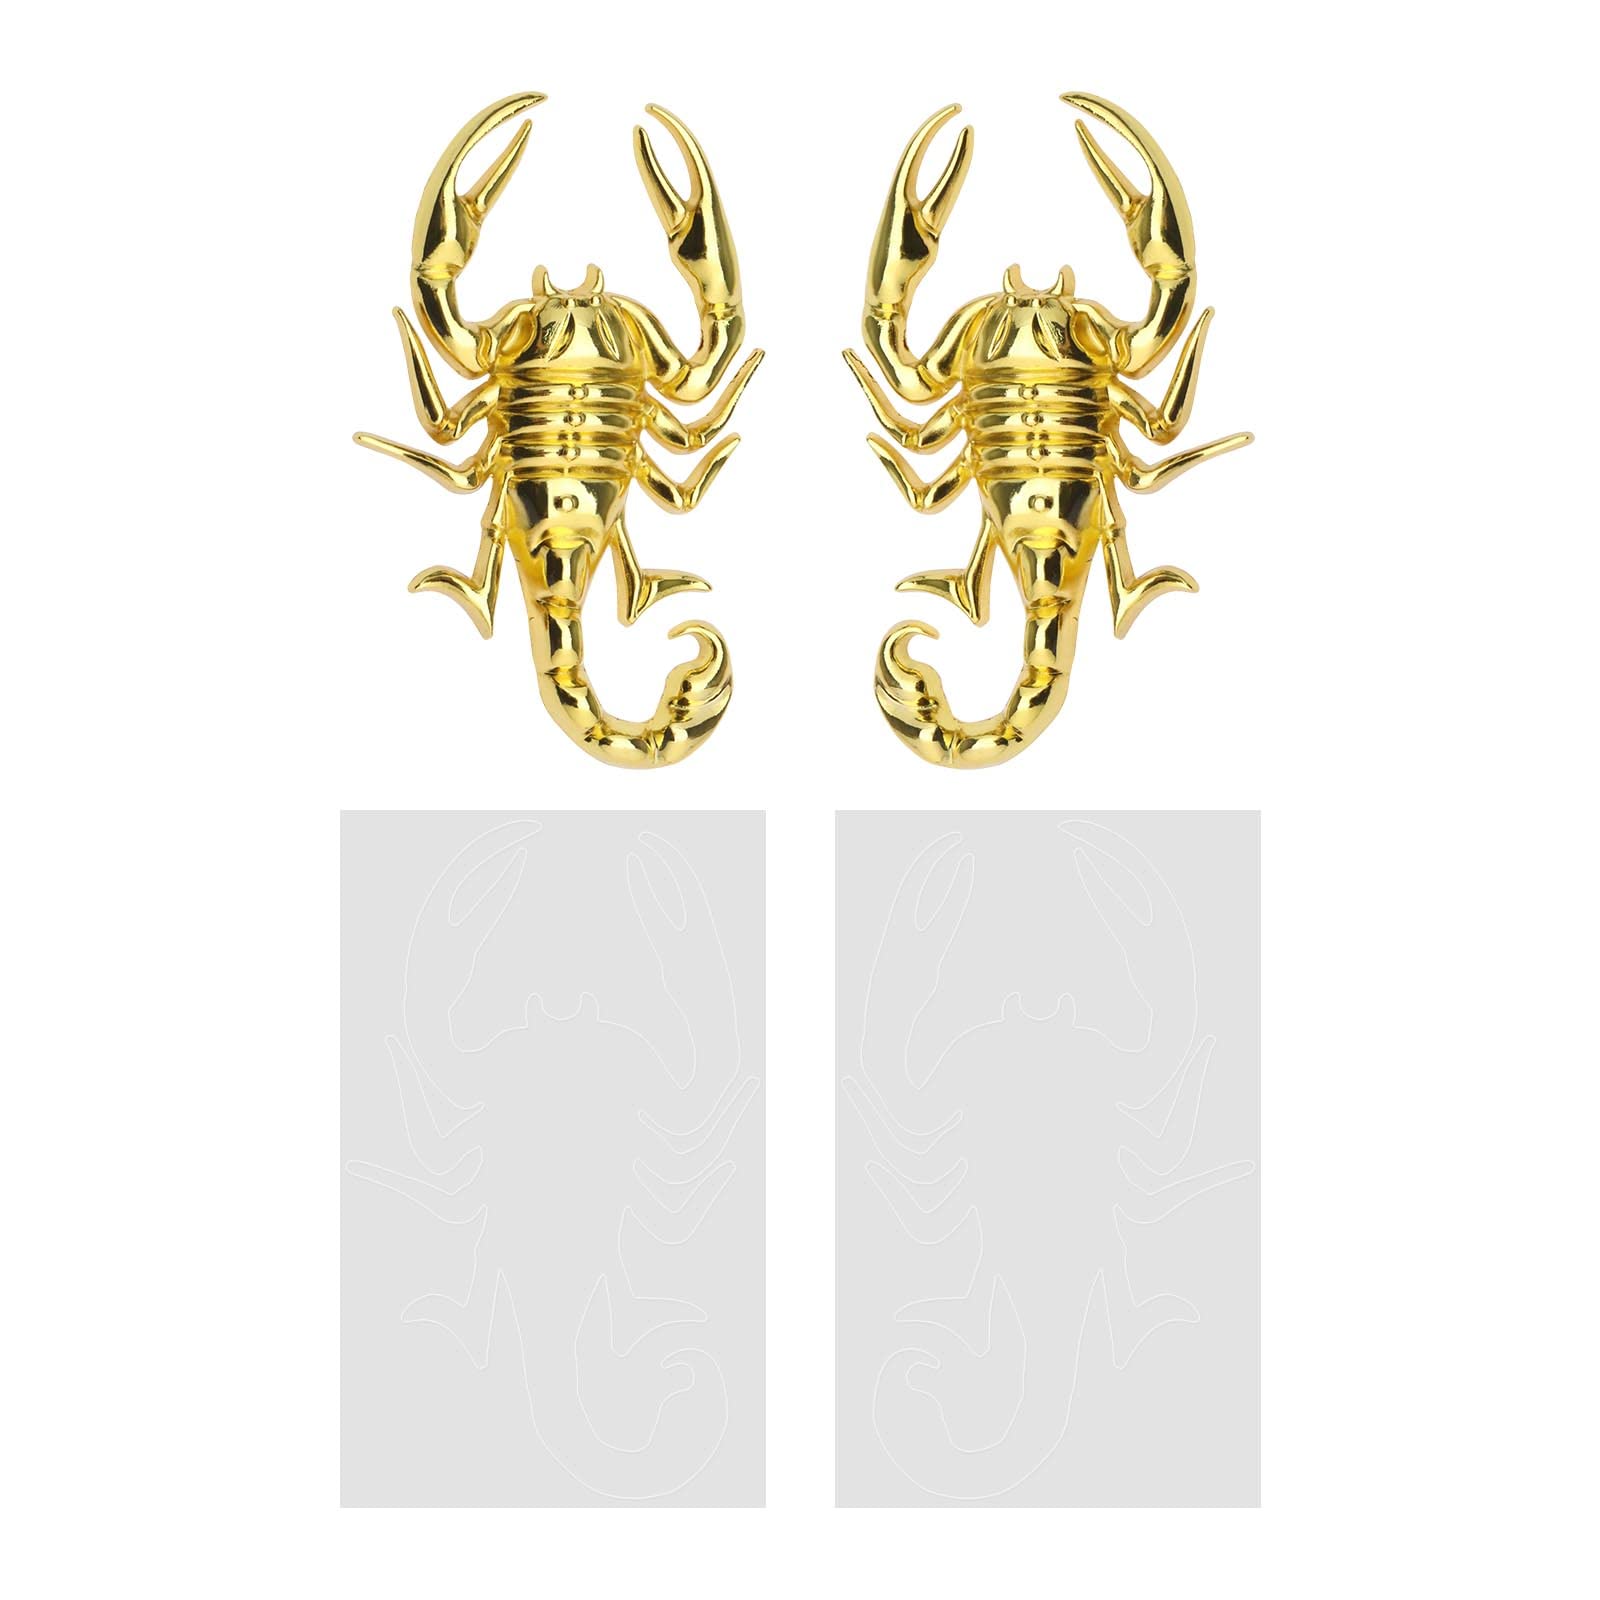 Be In Your Mind 1 Pair Car 3D Scorpion Metal Sticker Waterproof Anti-Rust Car Body Decorative Decor Badge Emblem for Automotive Motorcycle Zinc Alloy Gold von Be In Your Mind